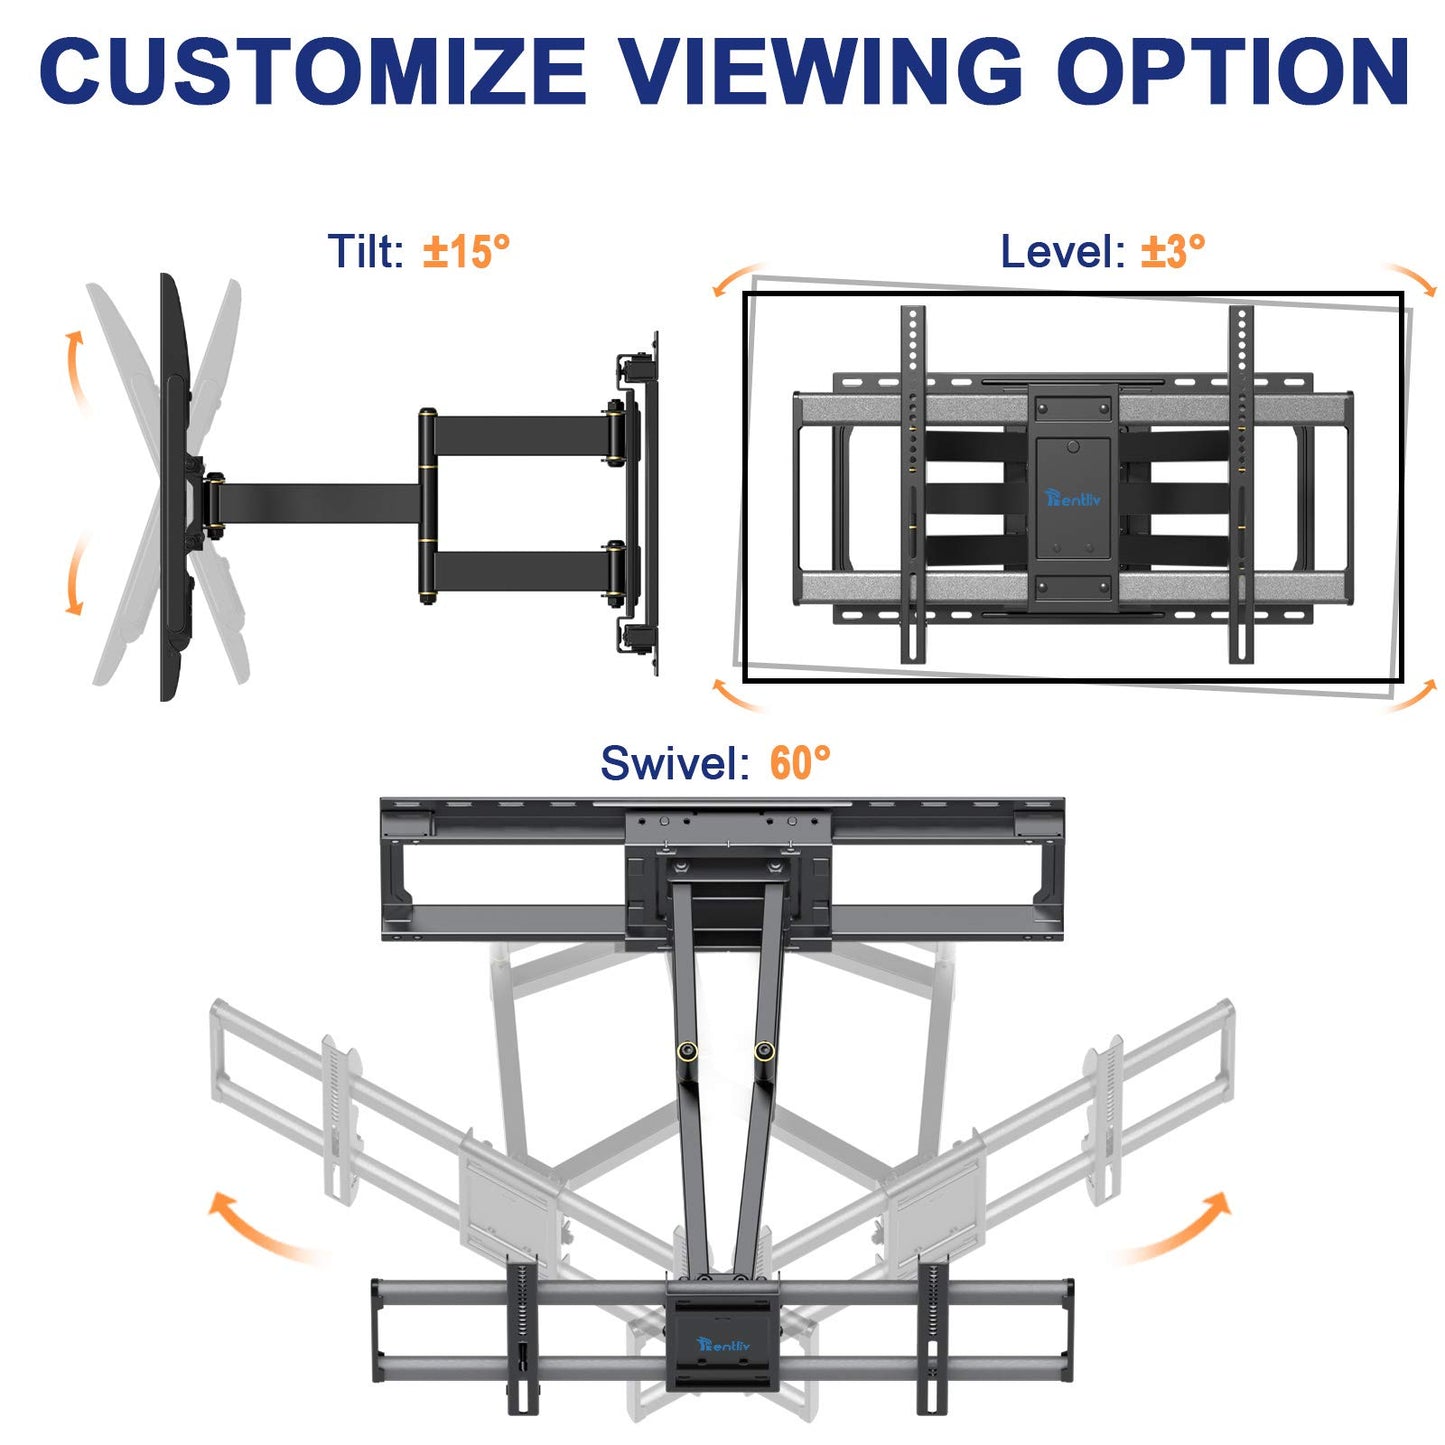 Rentliv TV Mount with Sliding Design for Most 37-80 inch Flat Curved TVs Up to 132 lbs., Full Motion TV Wall Mount with Swivel Articulating Arms, Max VESA 600x400mm, Easy for TV Centering on Wall